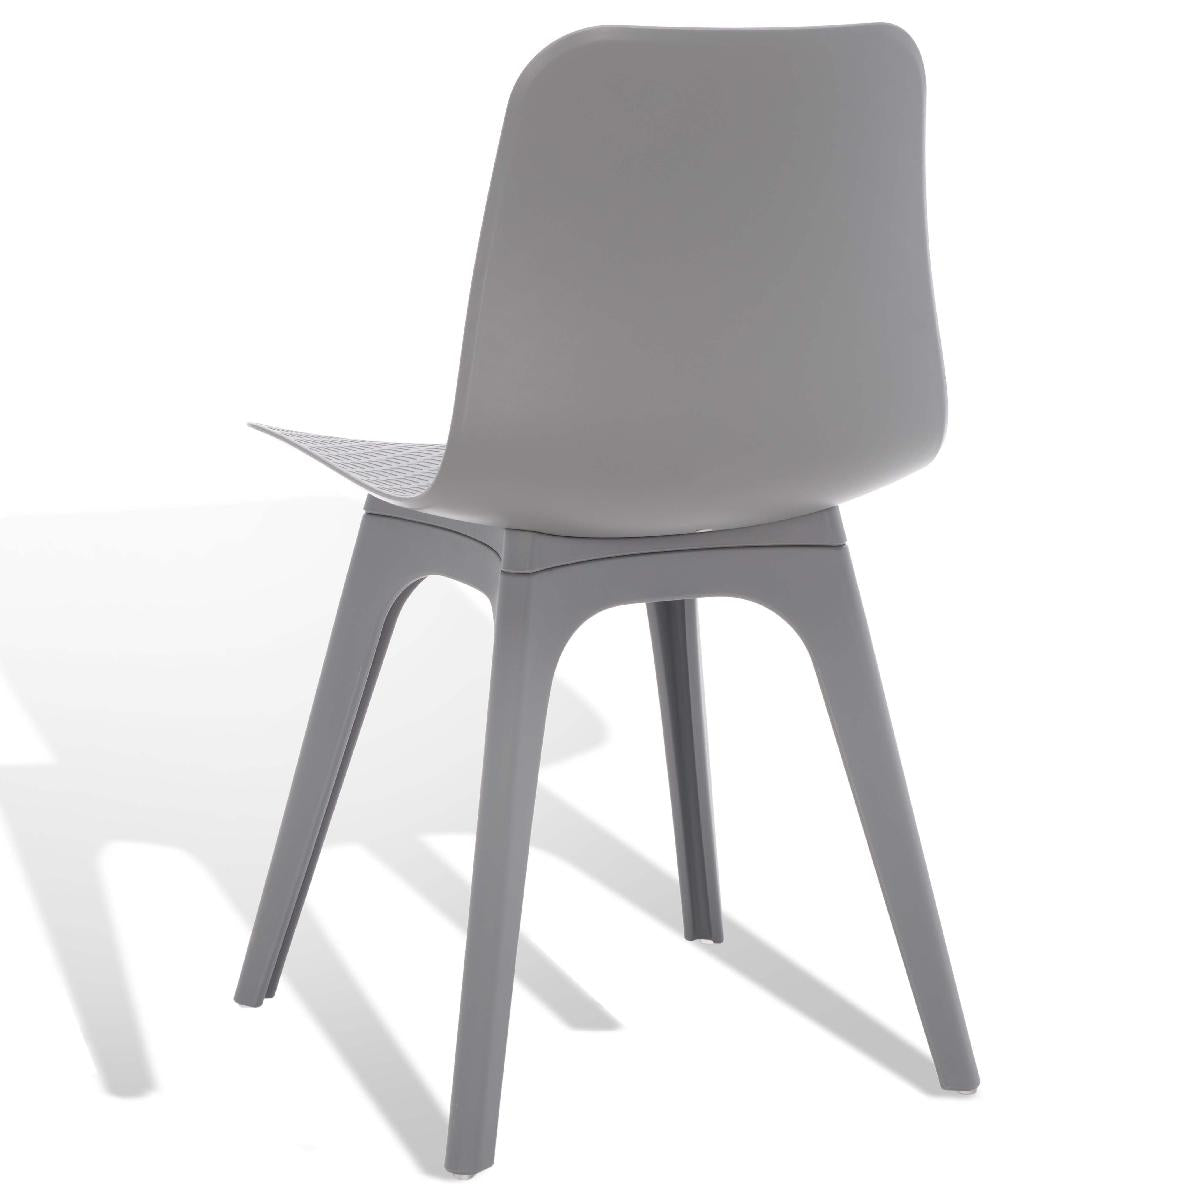 Safavieh Couture Damiano Molded Plastic Dining Chair - Grey